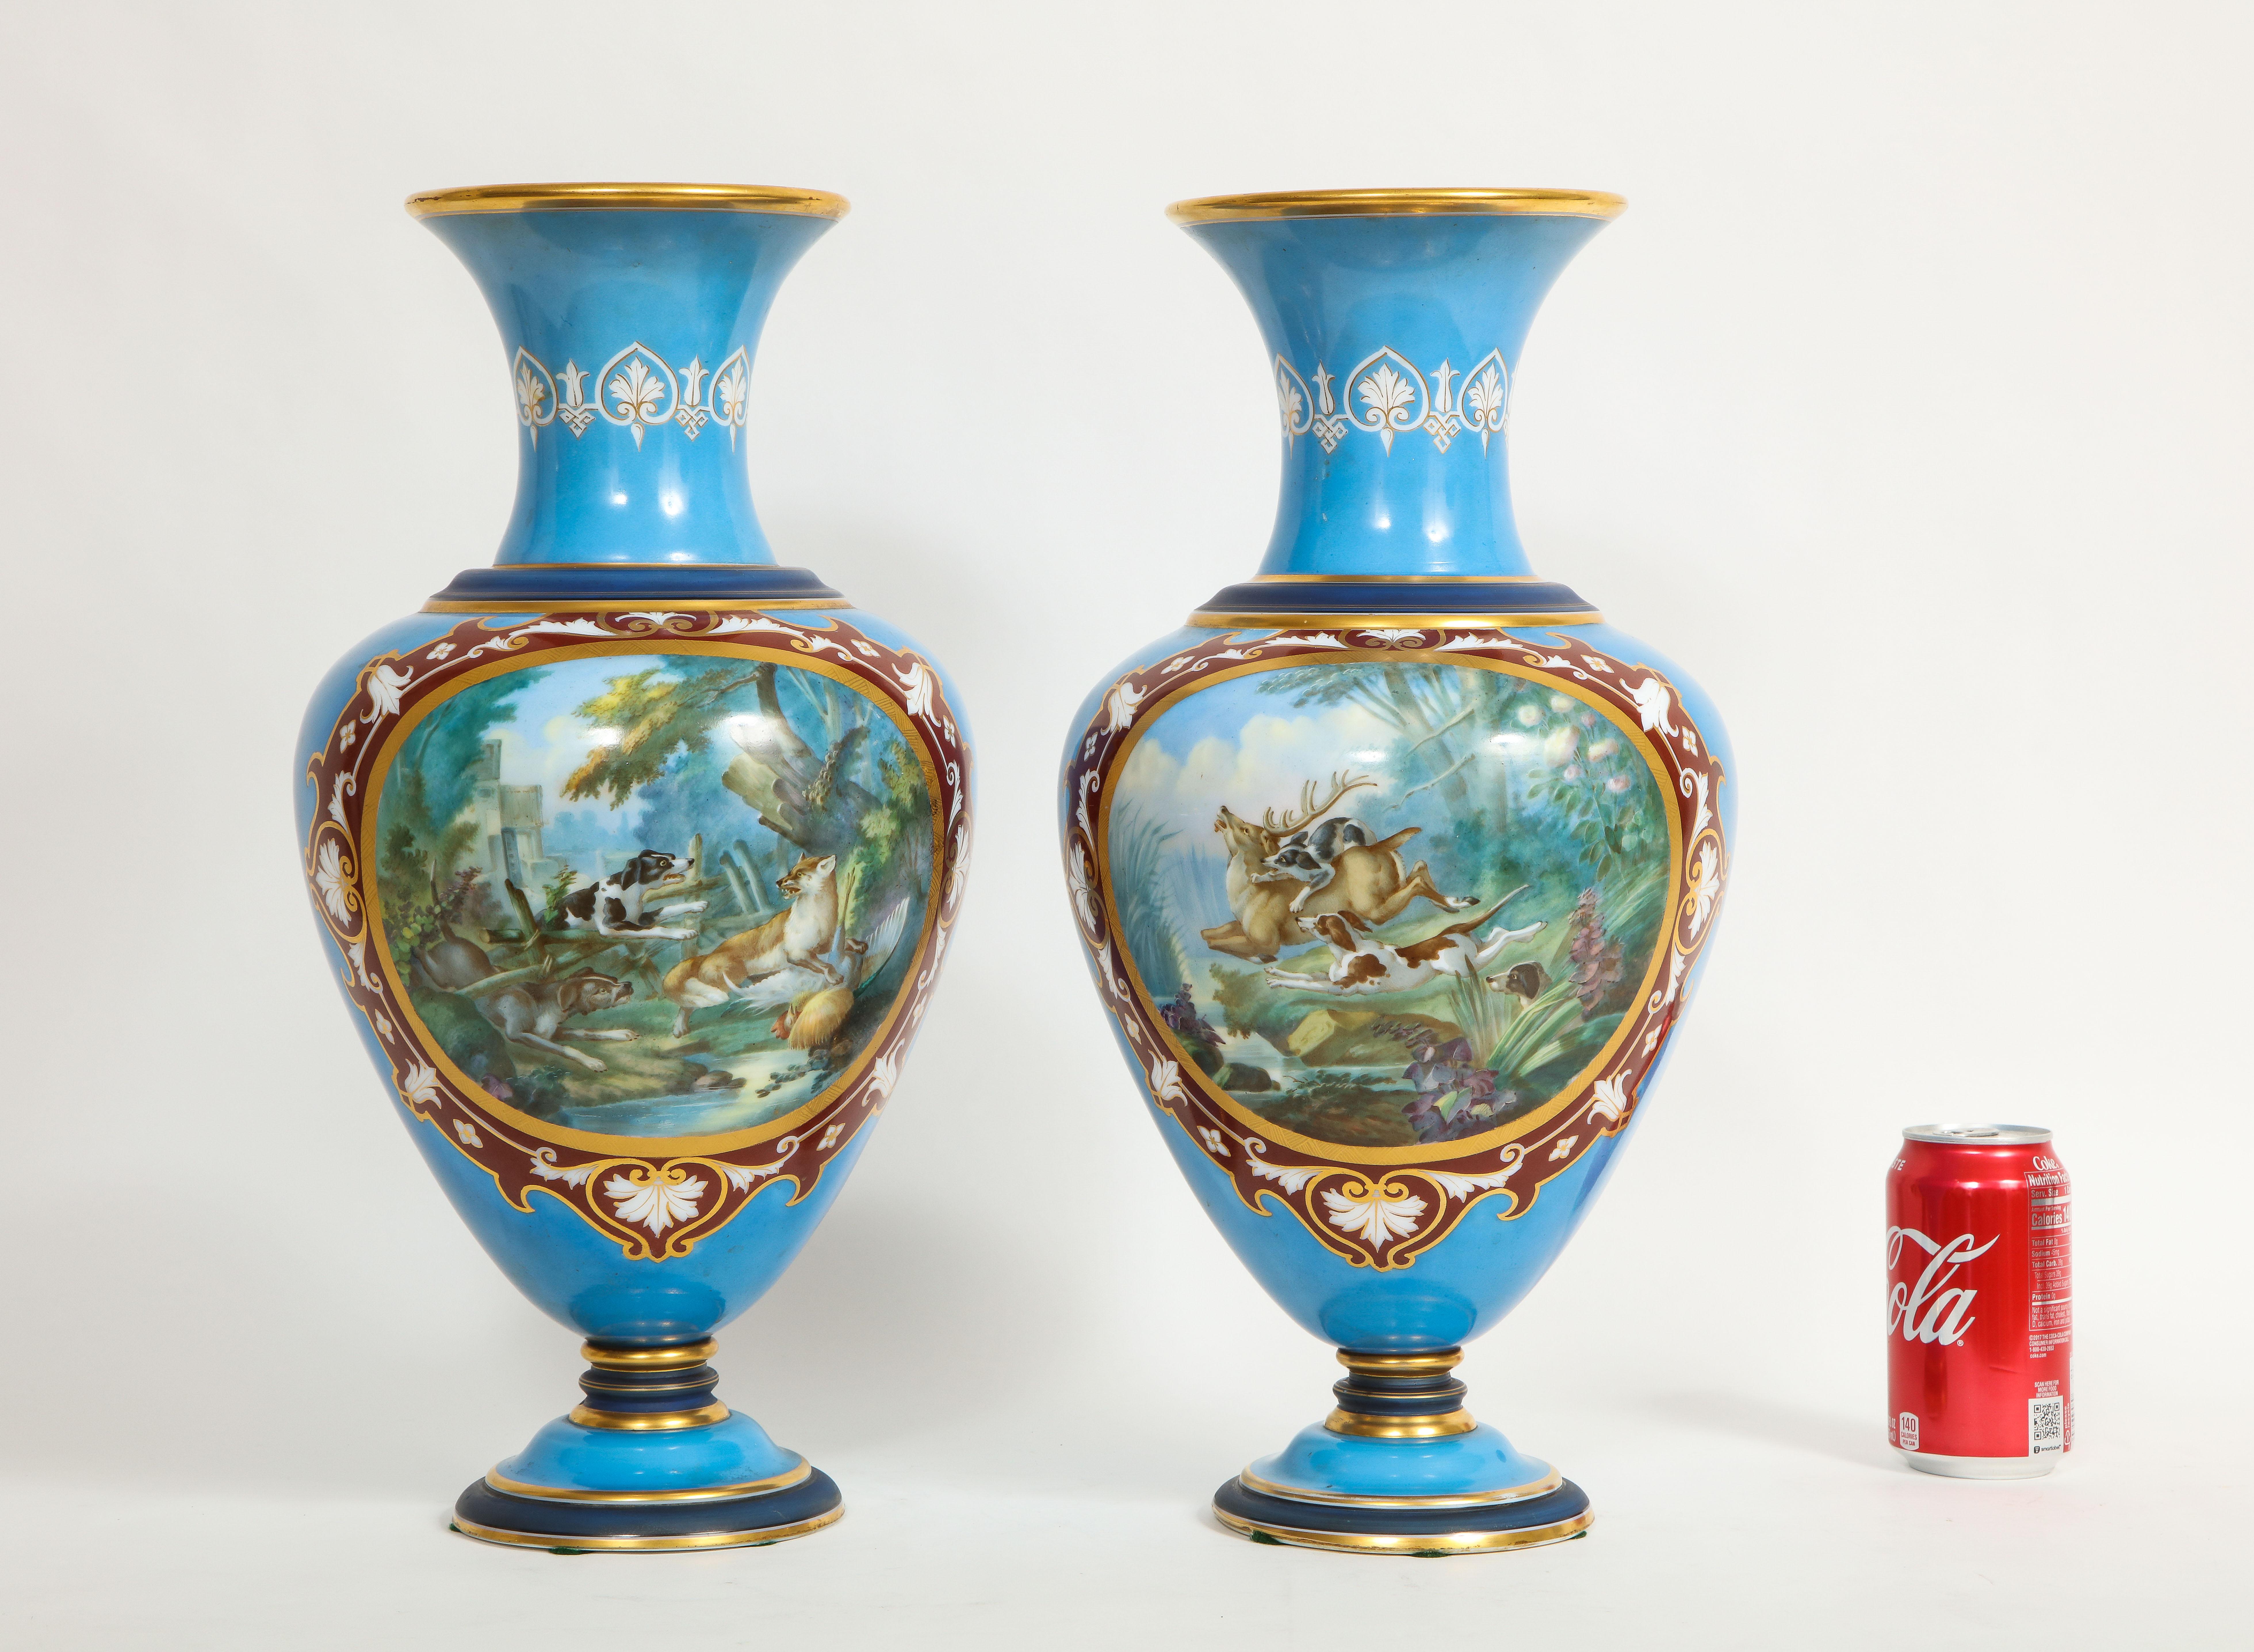 19th Century French Pair of Baccarat Enameled Opaline Vases with Hunting Scenes For Sale 2